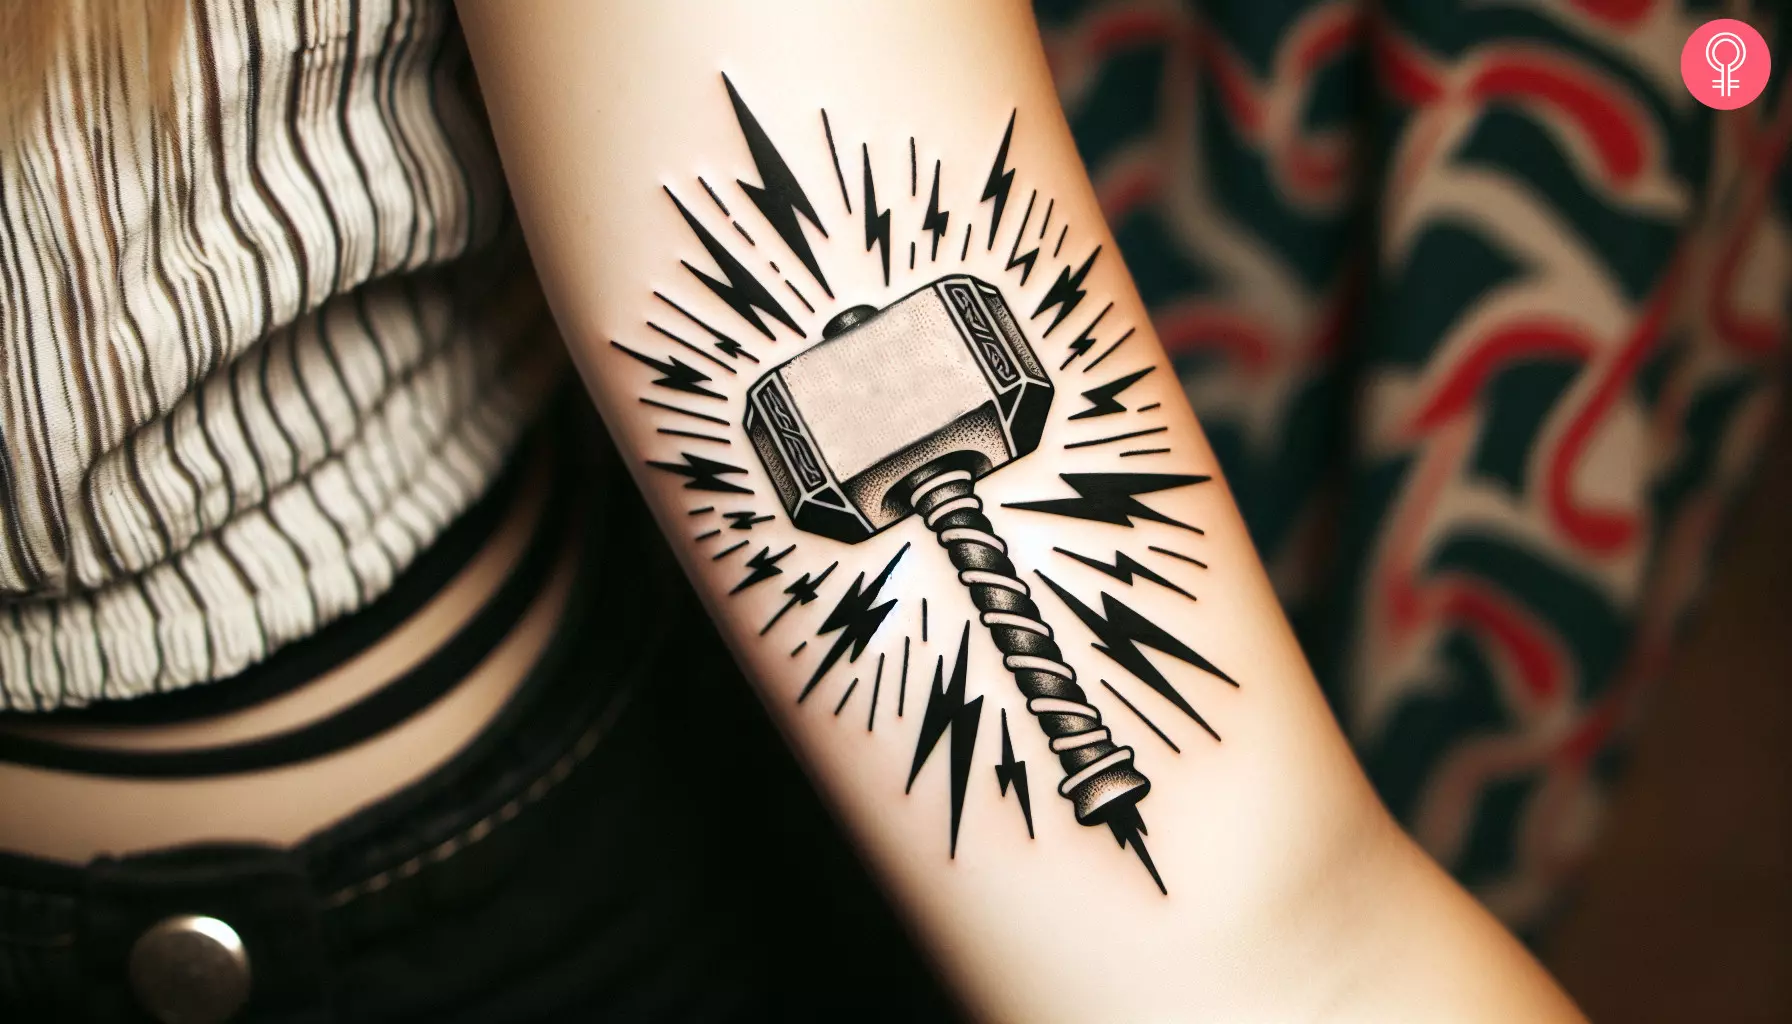 A tattoo featuring Thor’s hammer and lightning on a woman’s arm